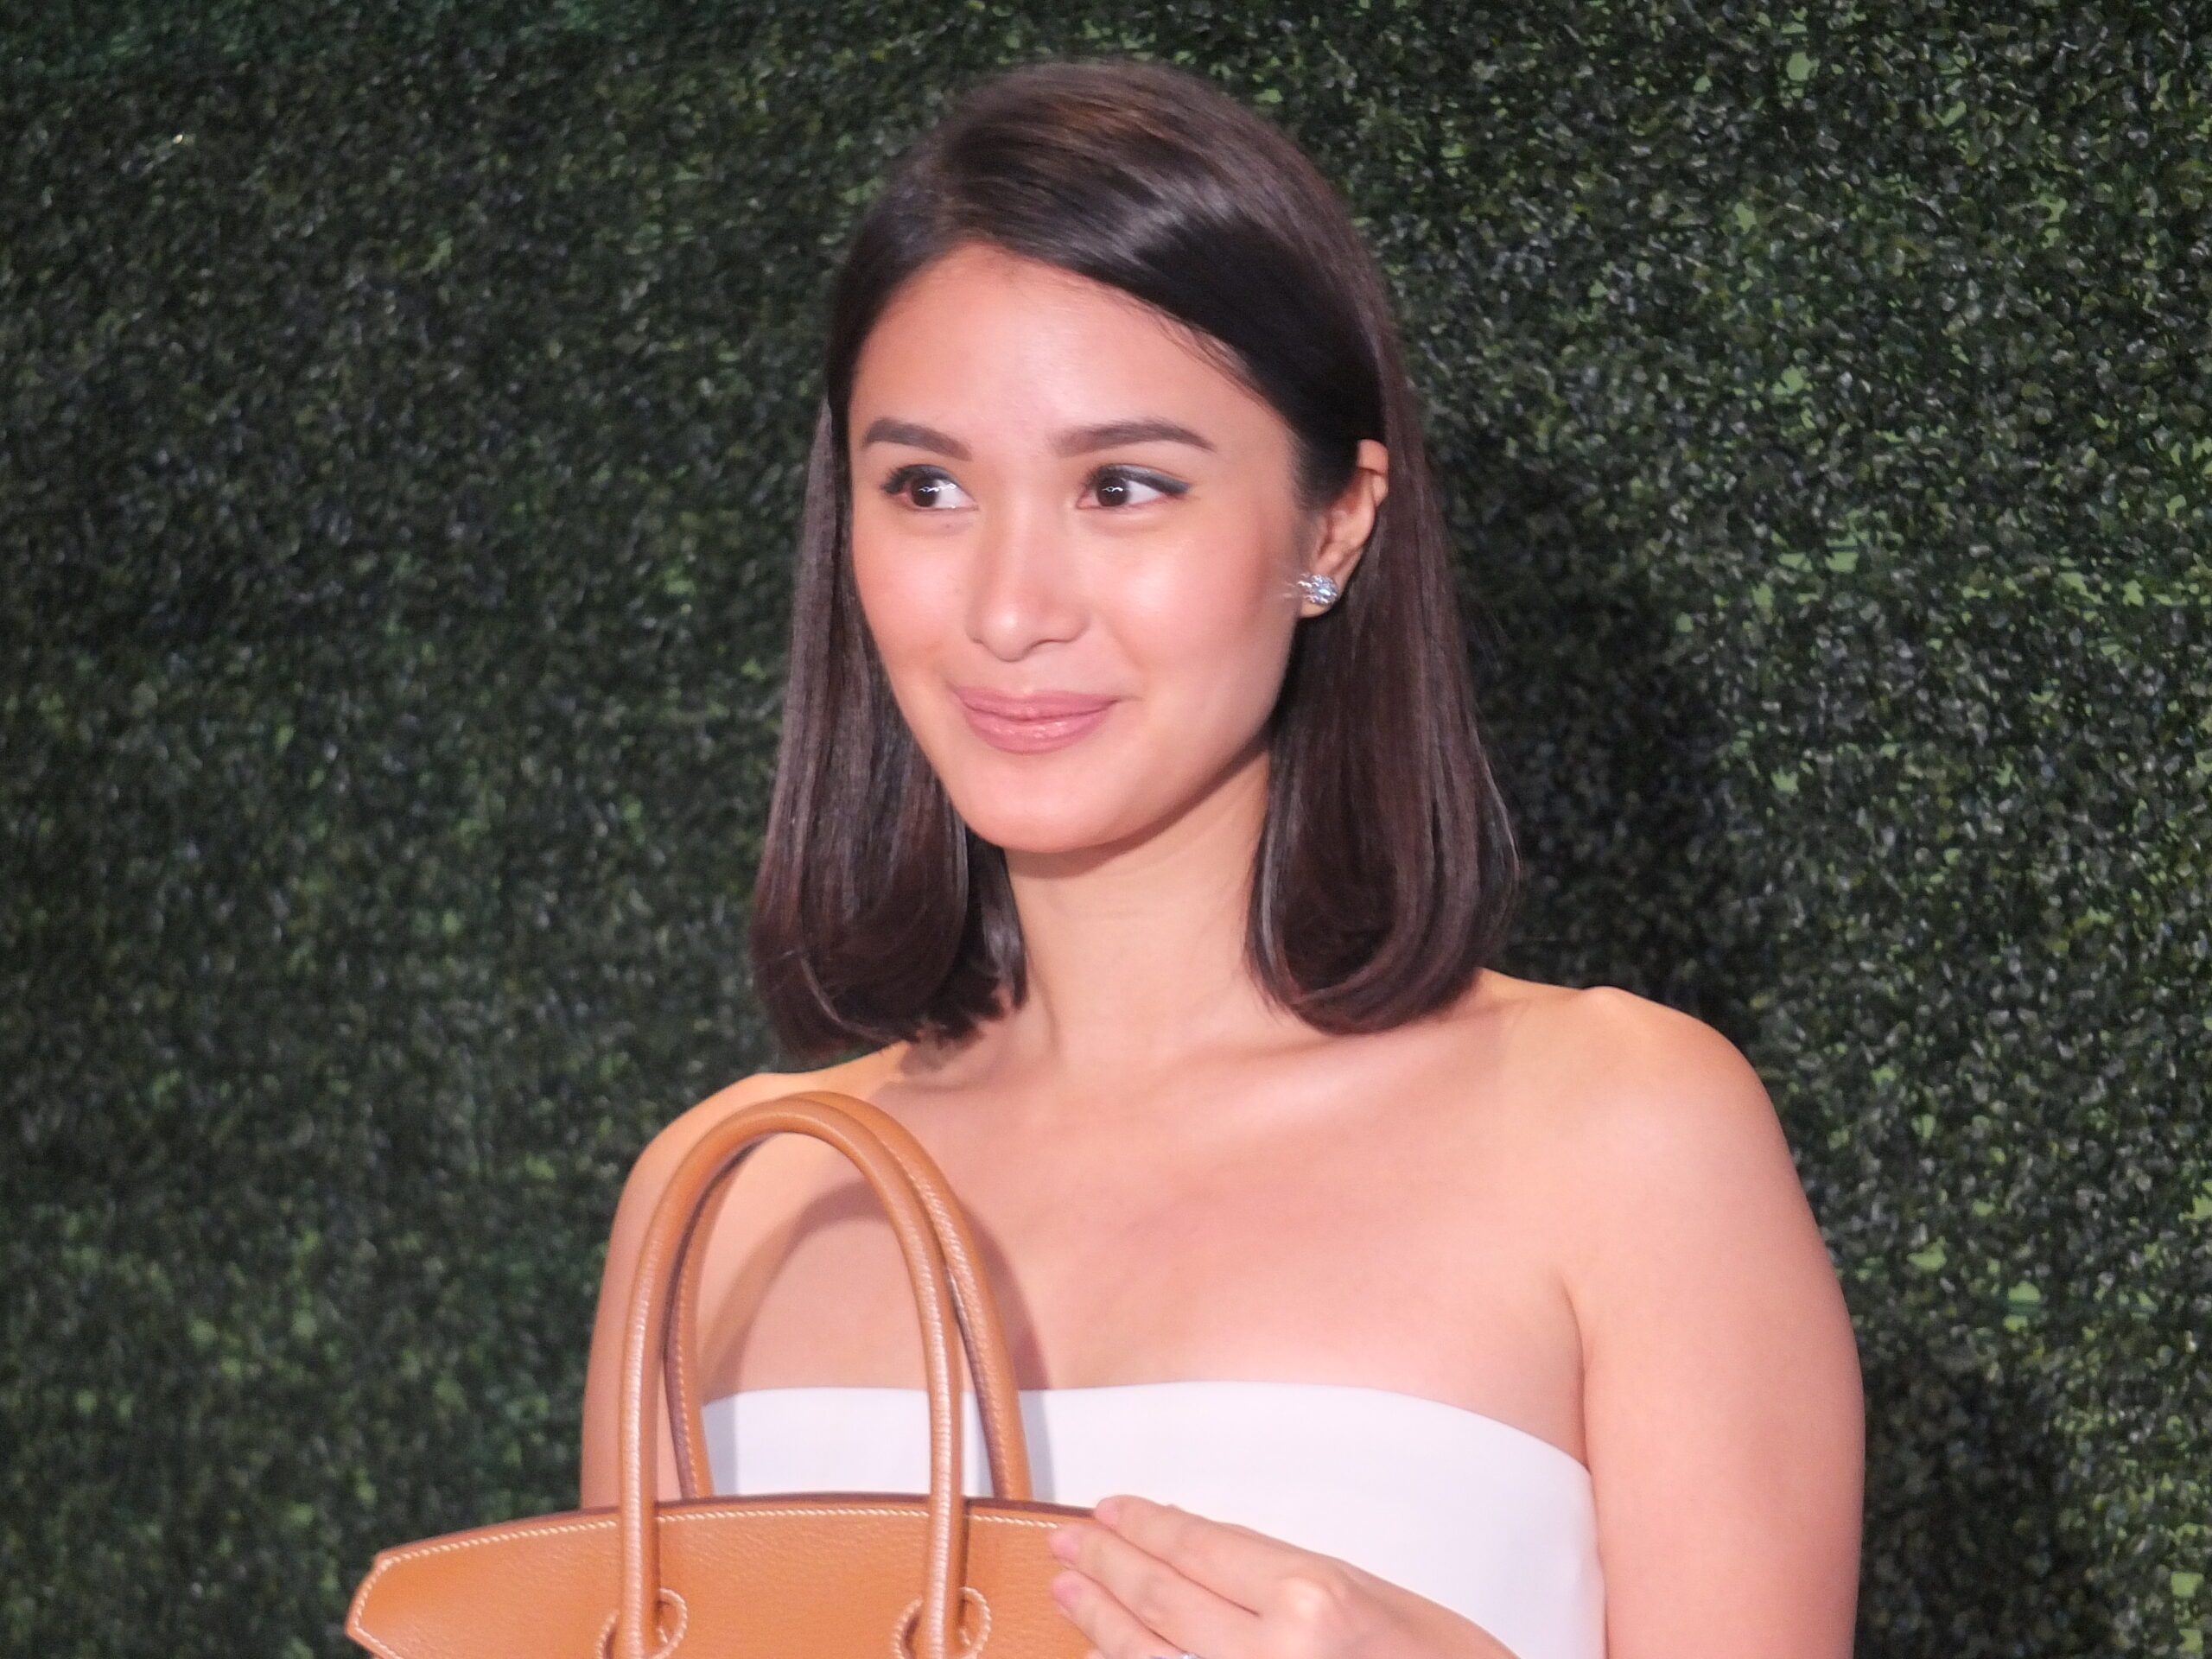 Check out Heart Evangelista’s line of hand-painted bags